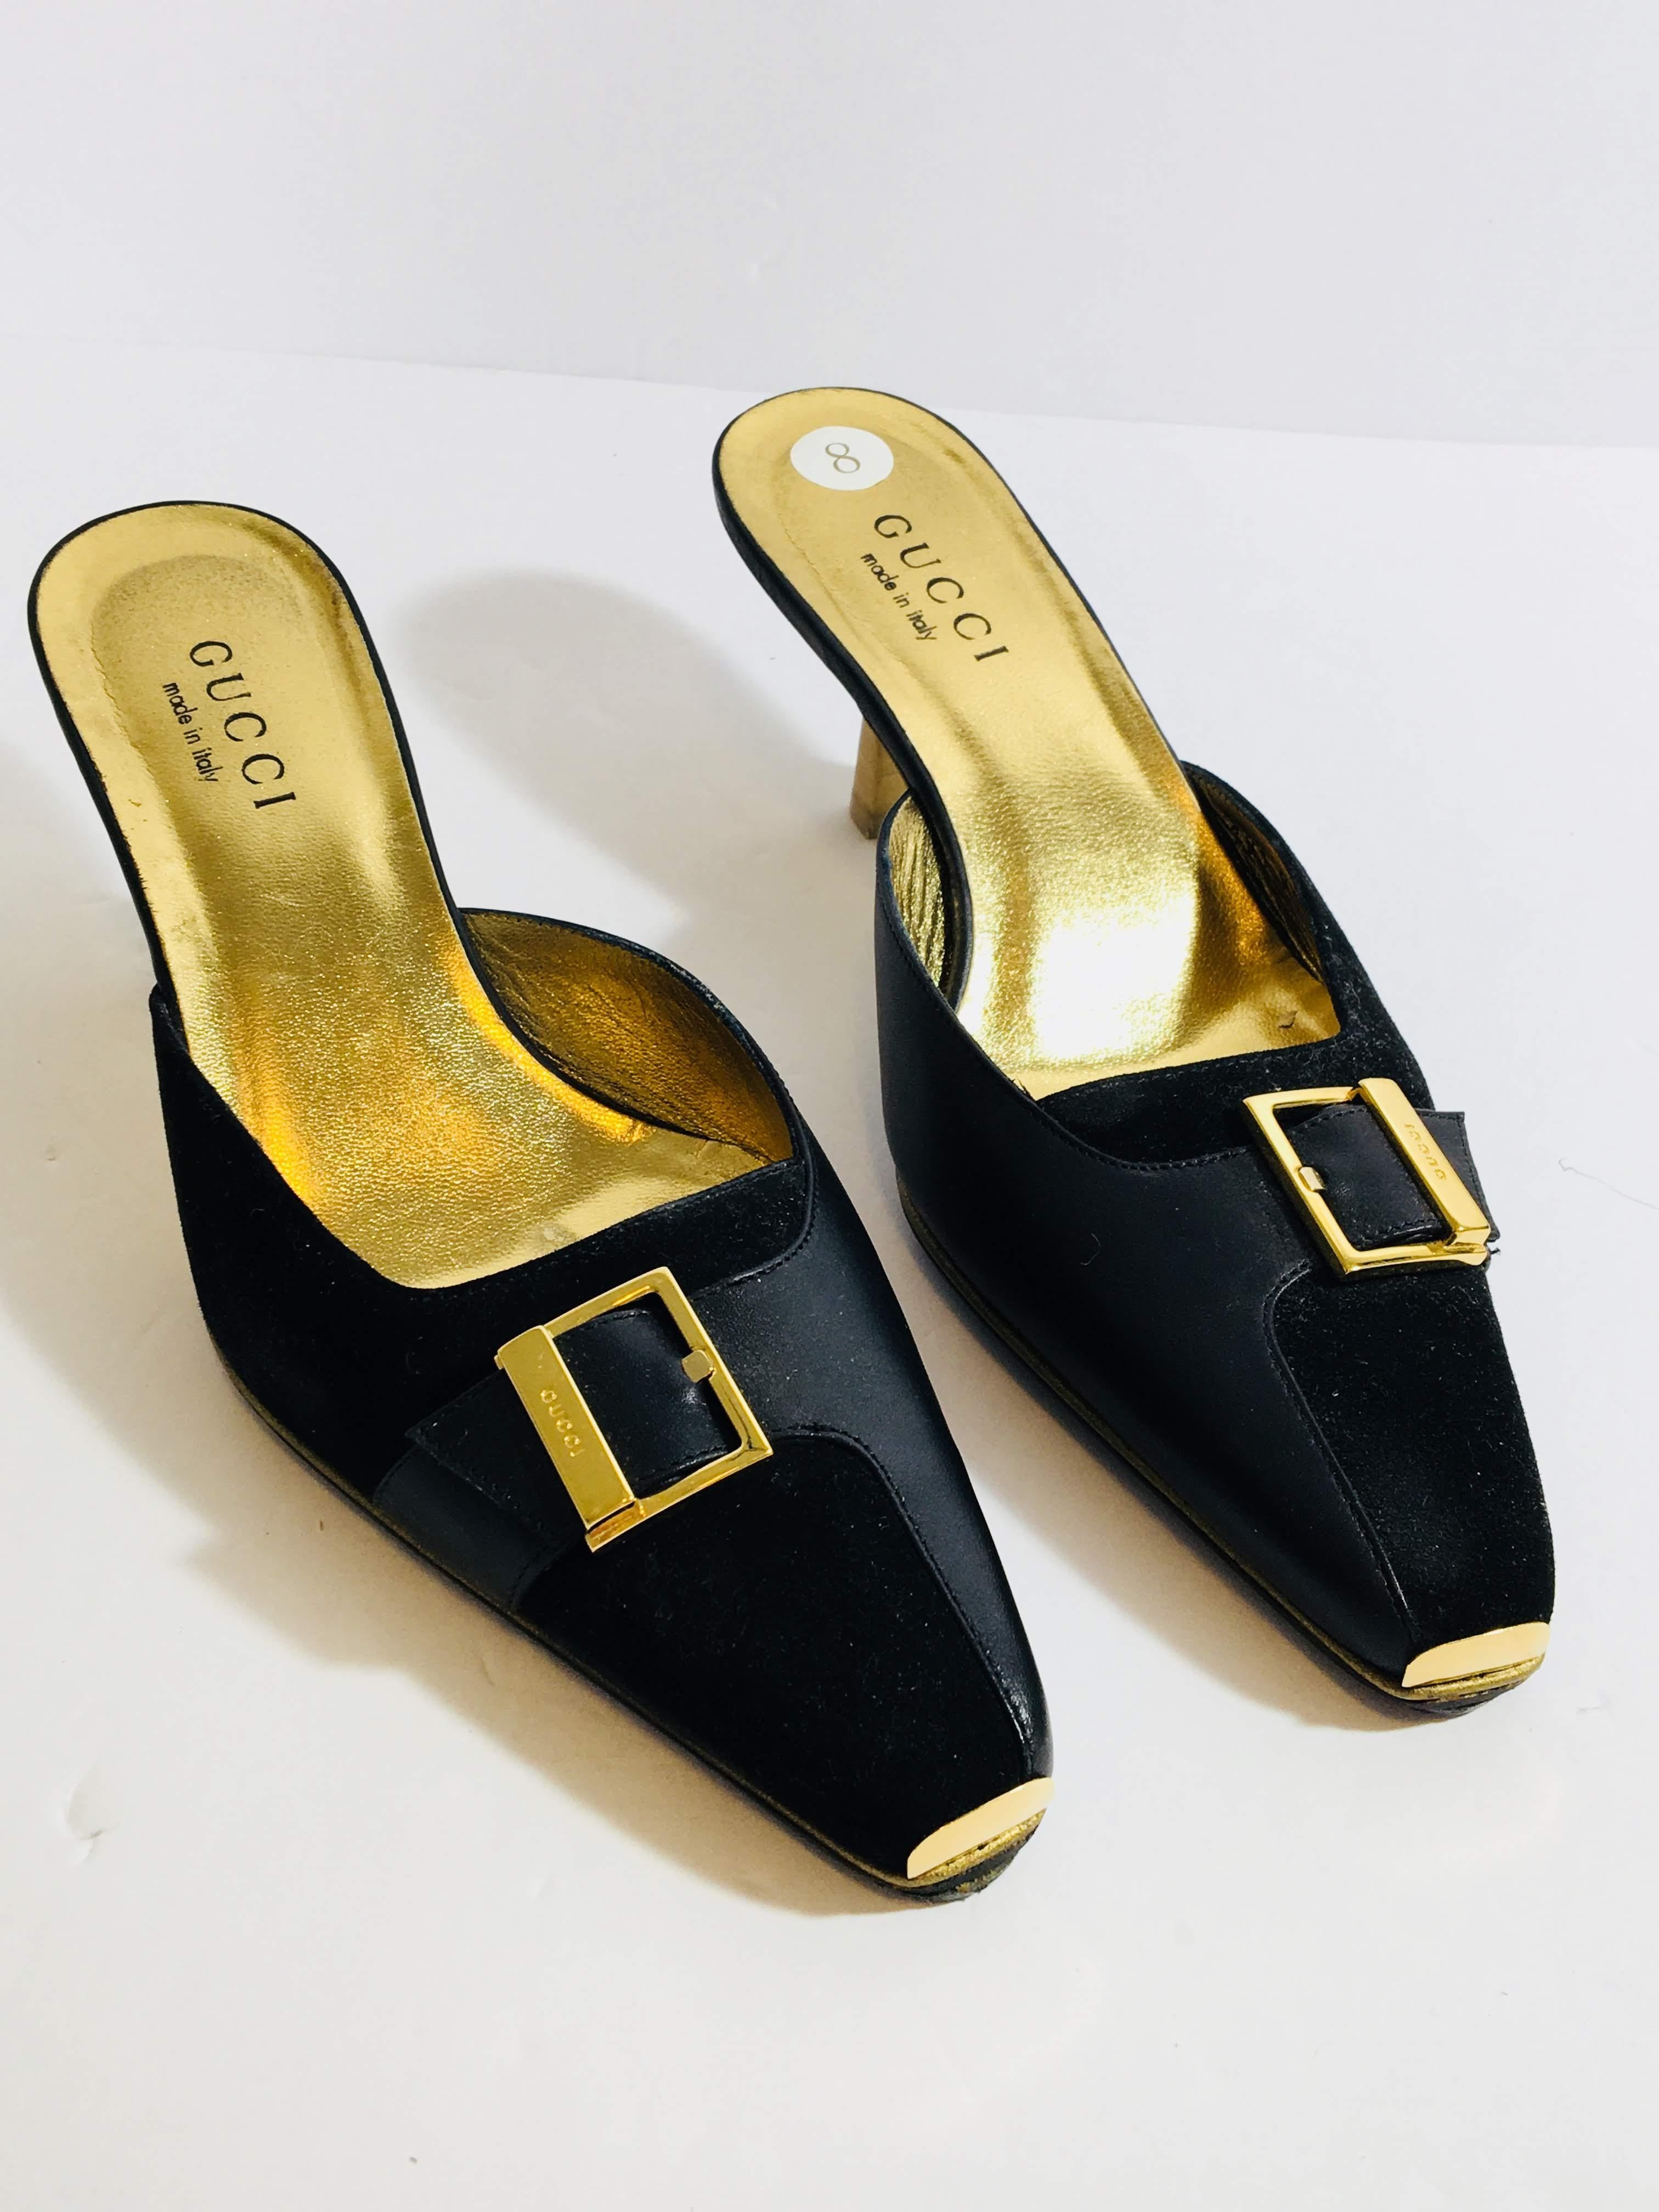 Gucci Black Leather and Velvet Paneled Kitten Heel Mule with Gold Buckle Detail and Square Toe in Size 8B.